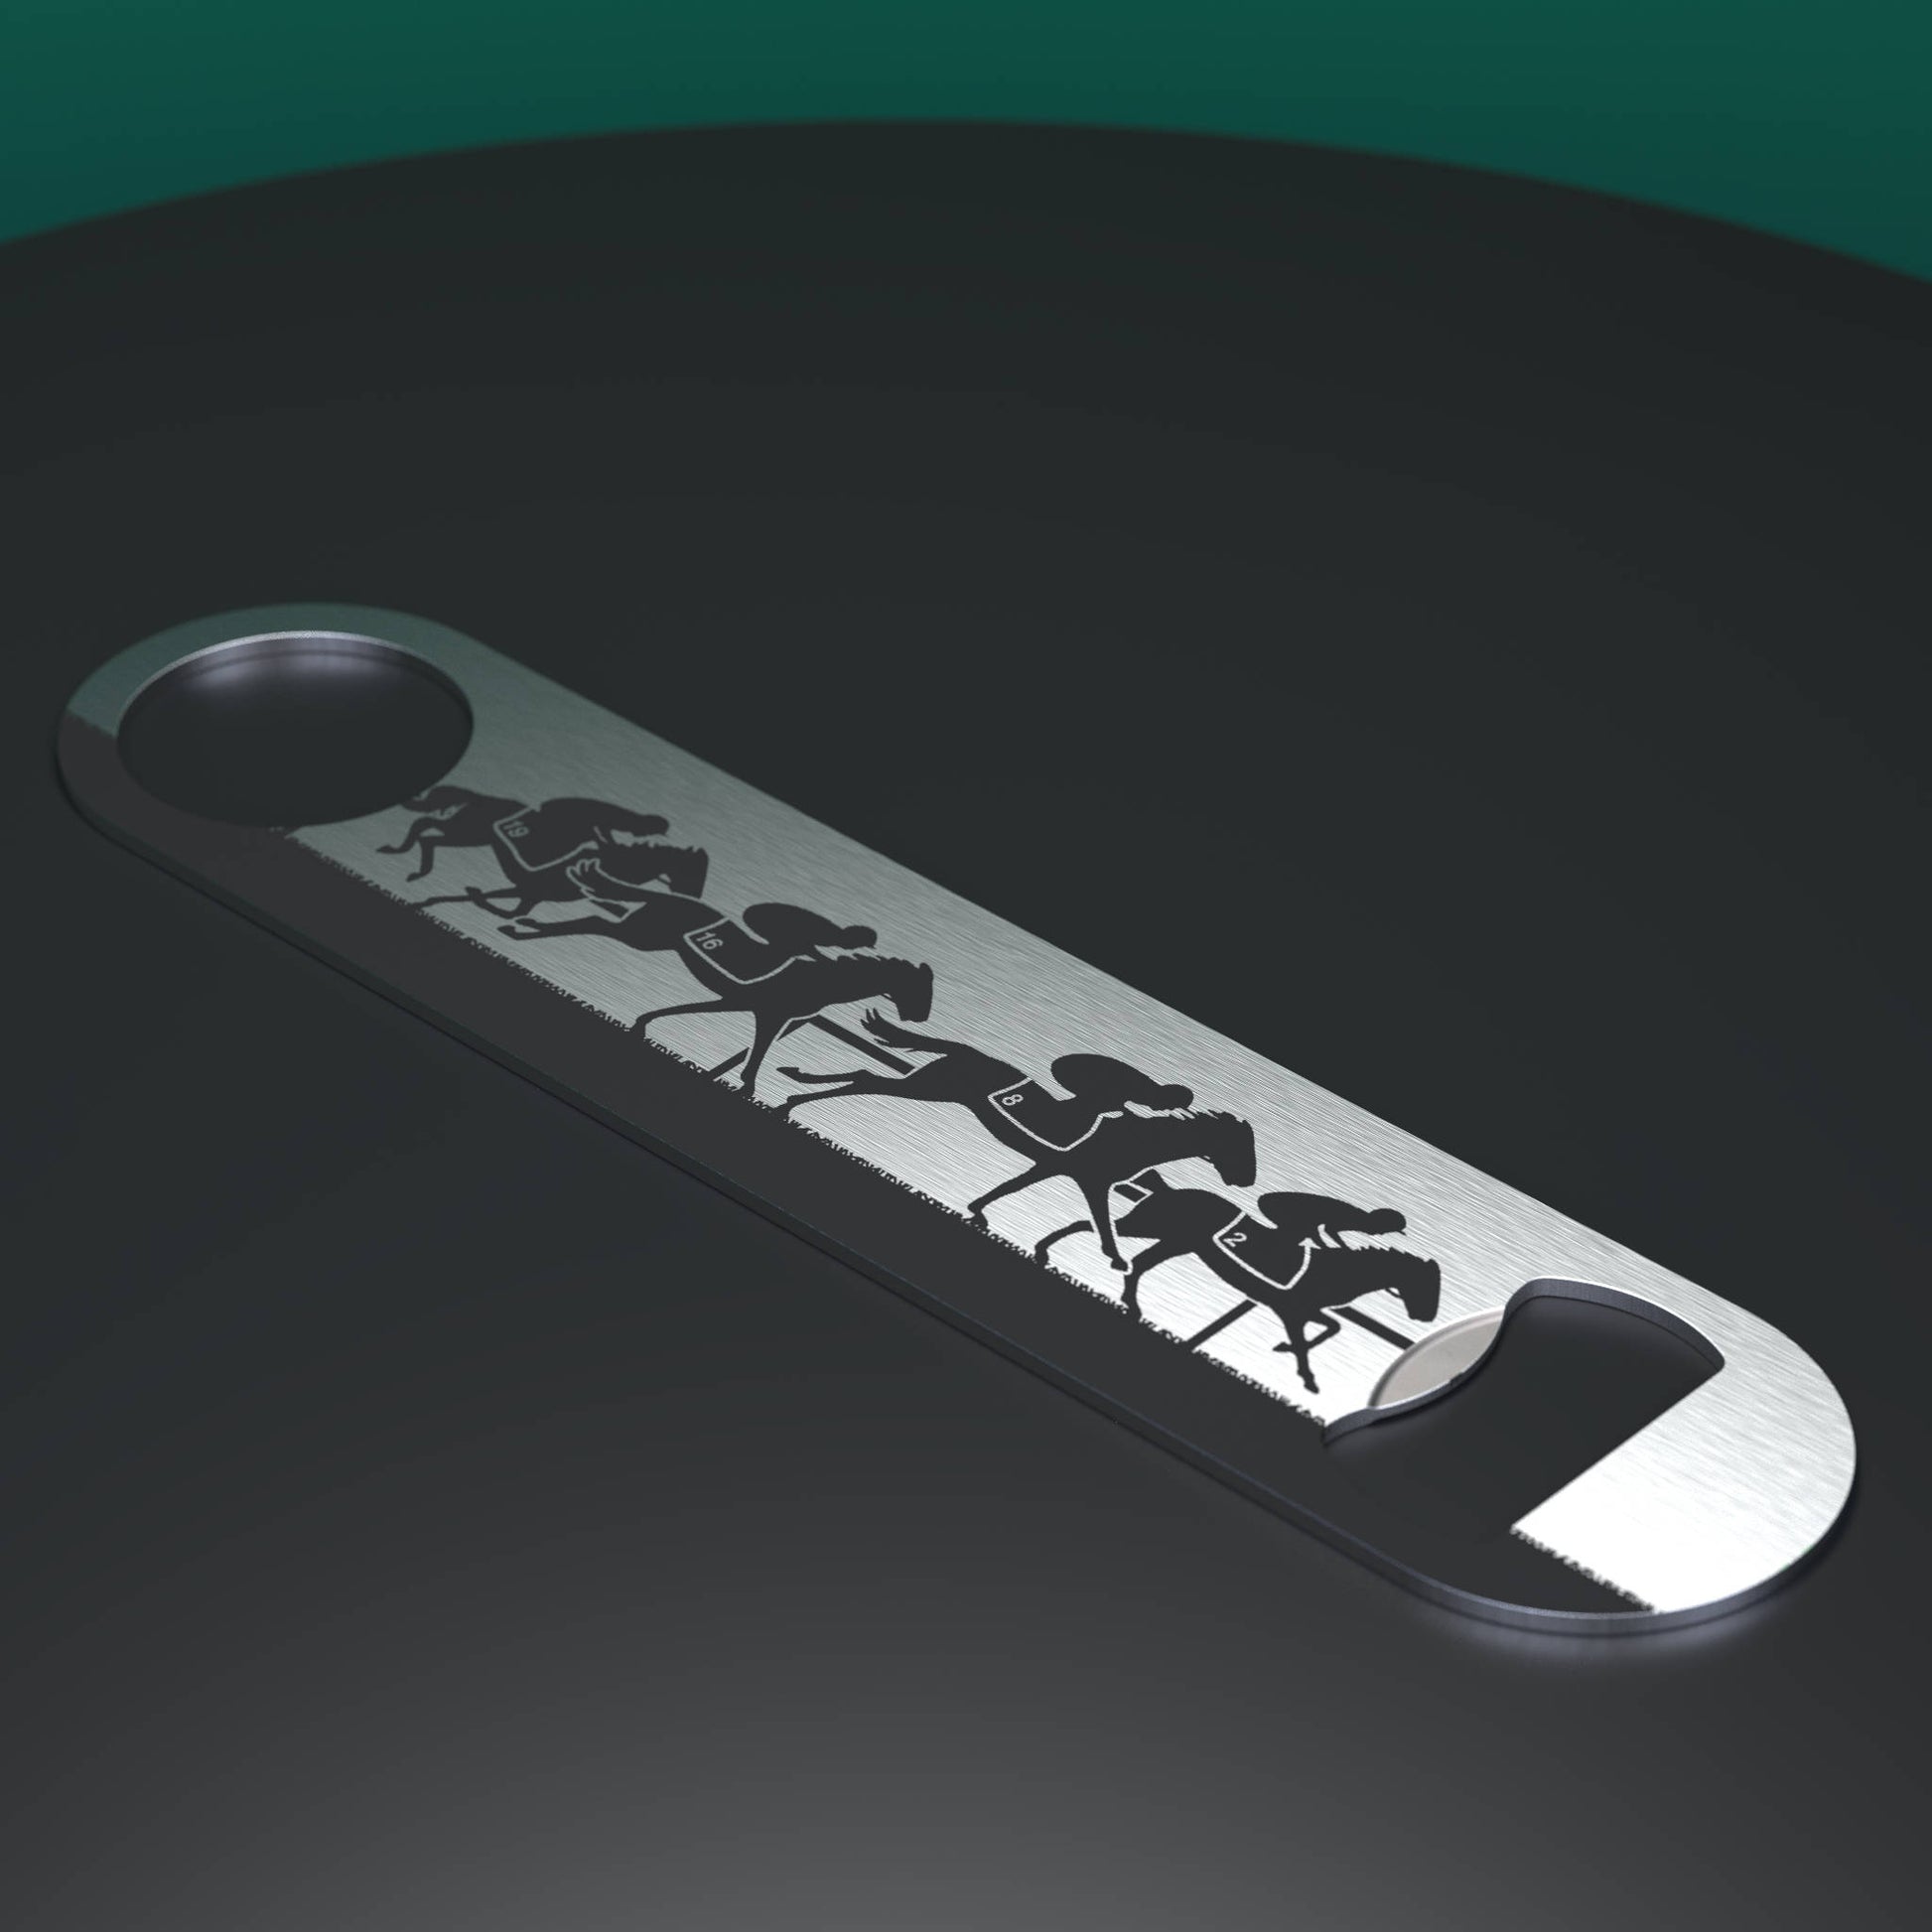 Stainless steel bottle opener engraved with a horse racing scene